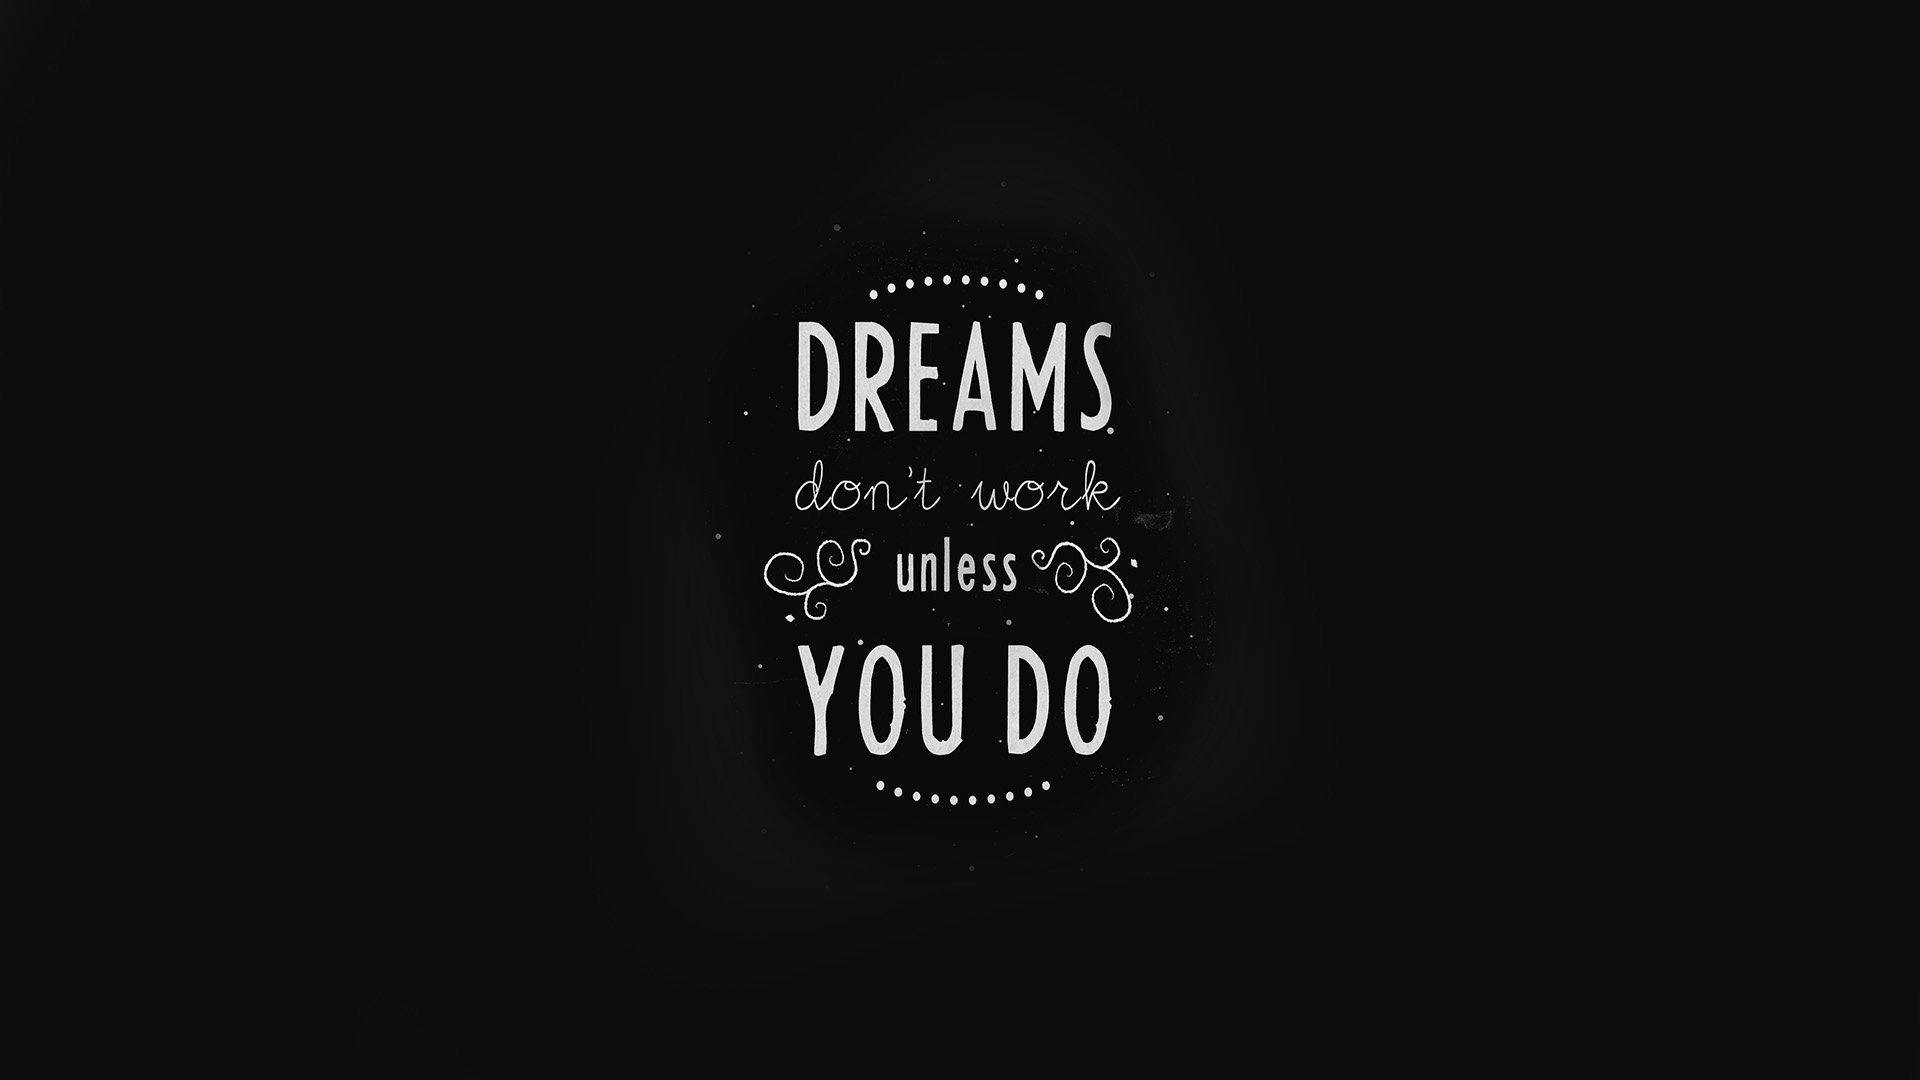 Work For Your Dreams Motivational Image Wallpaper